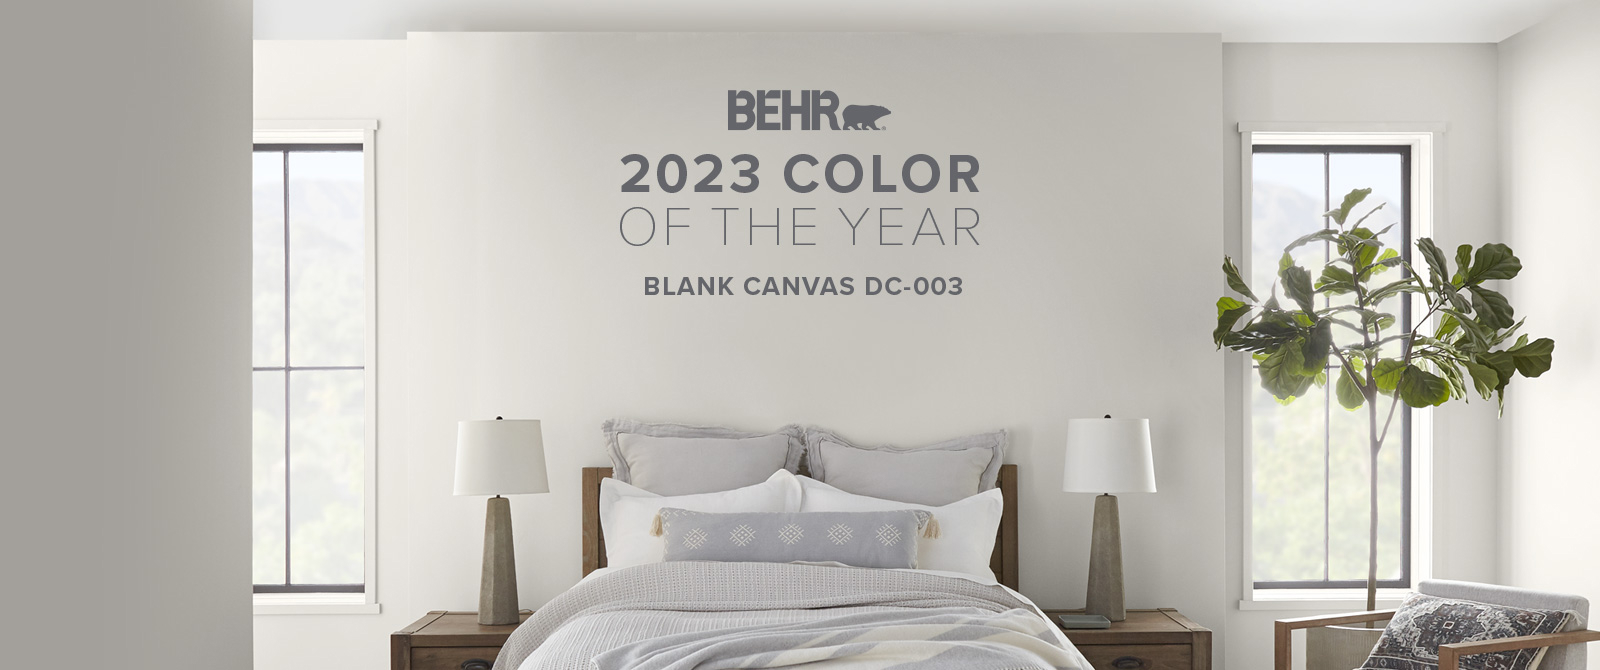 NEW BEHR 2023 Color of the Year - Behr Blank Canvas